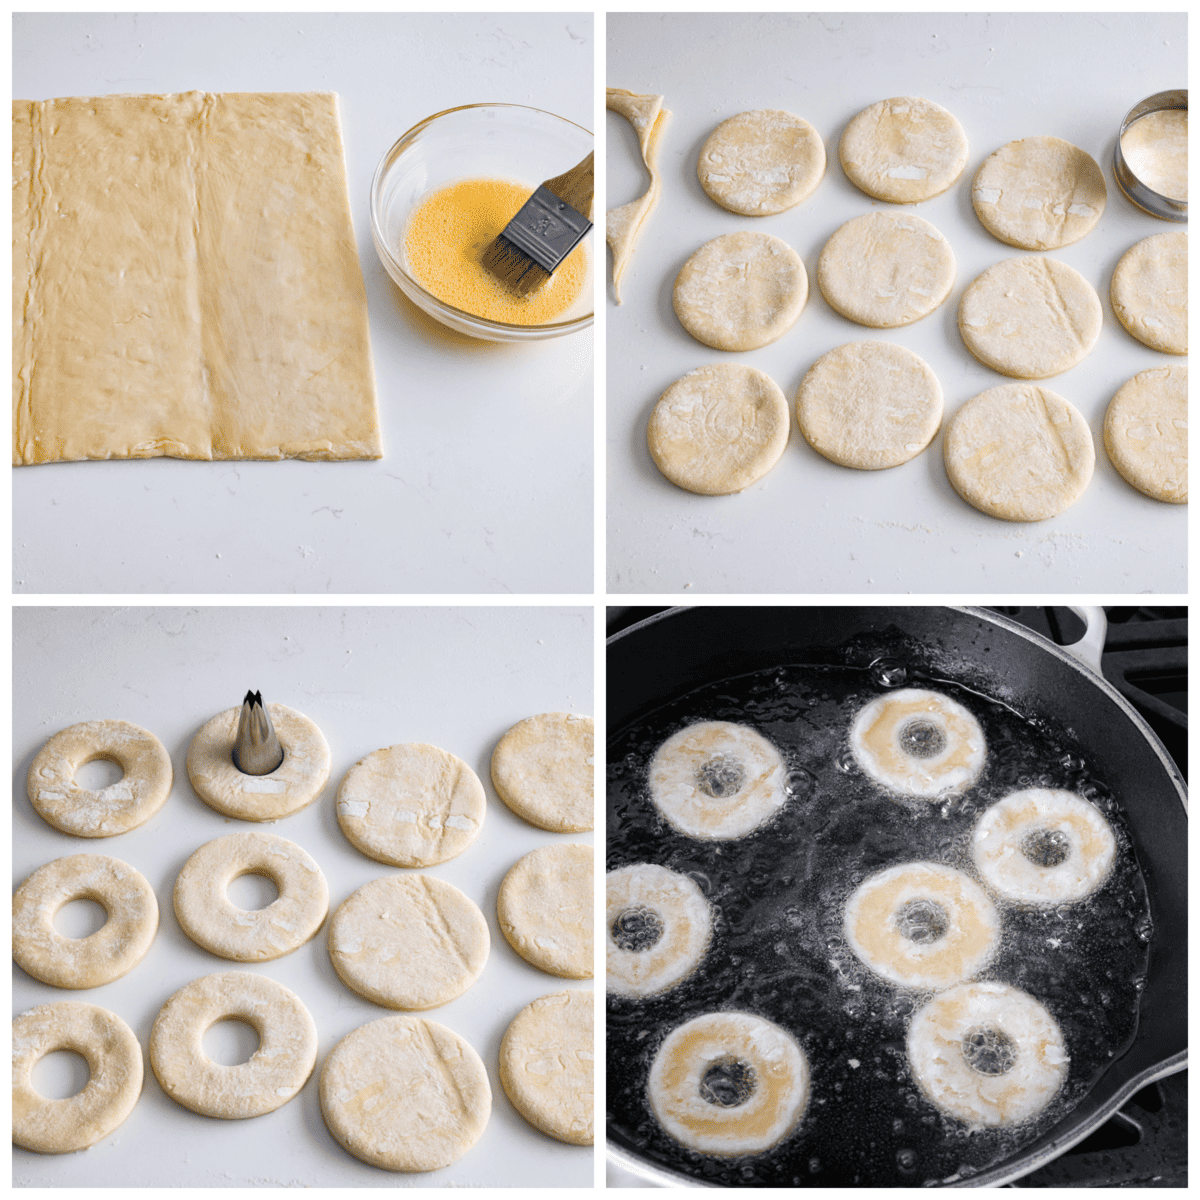 4 pictures showing how to cut and fry the cronut dough. 